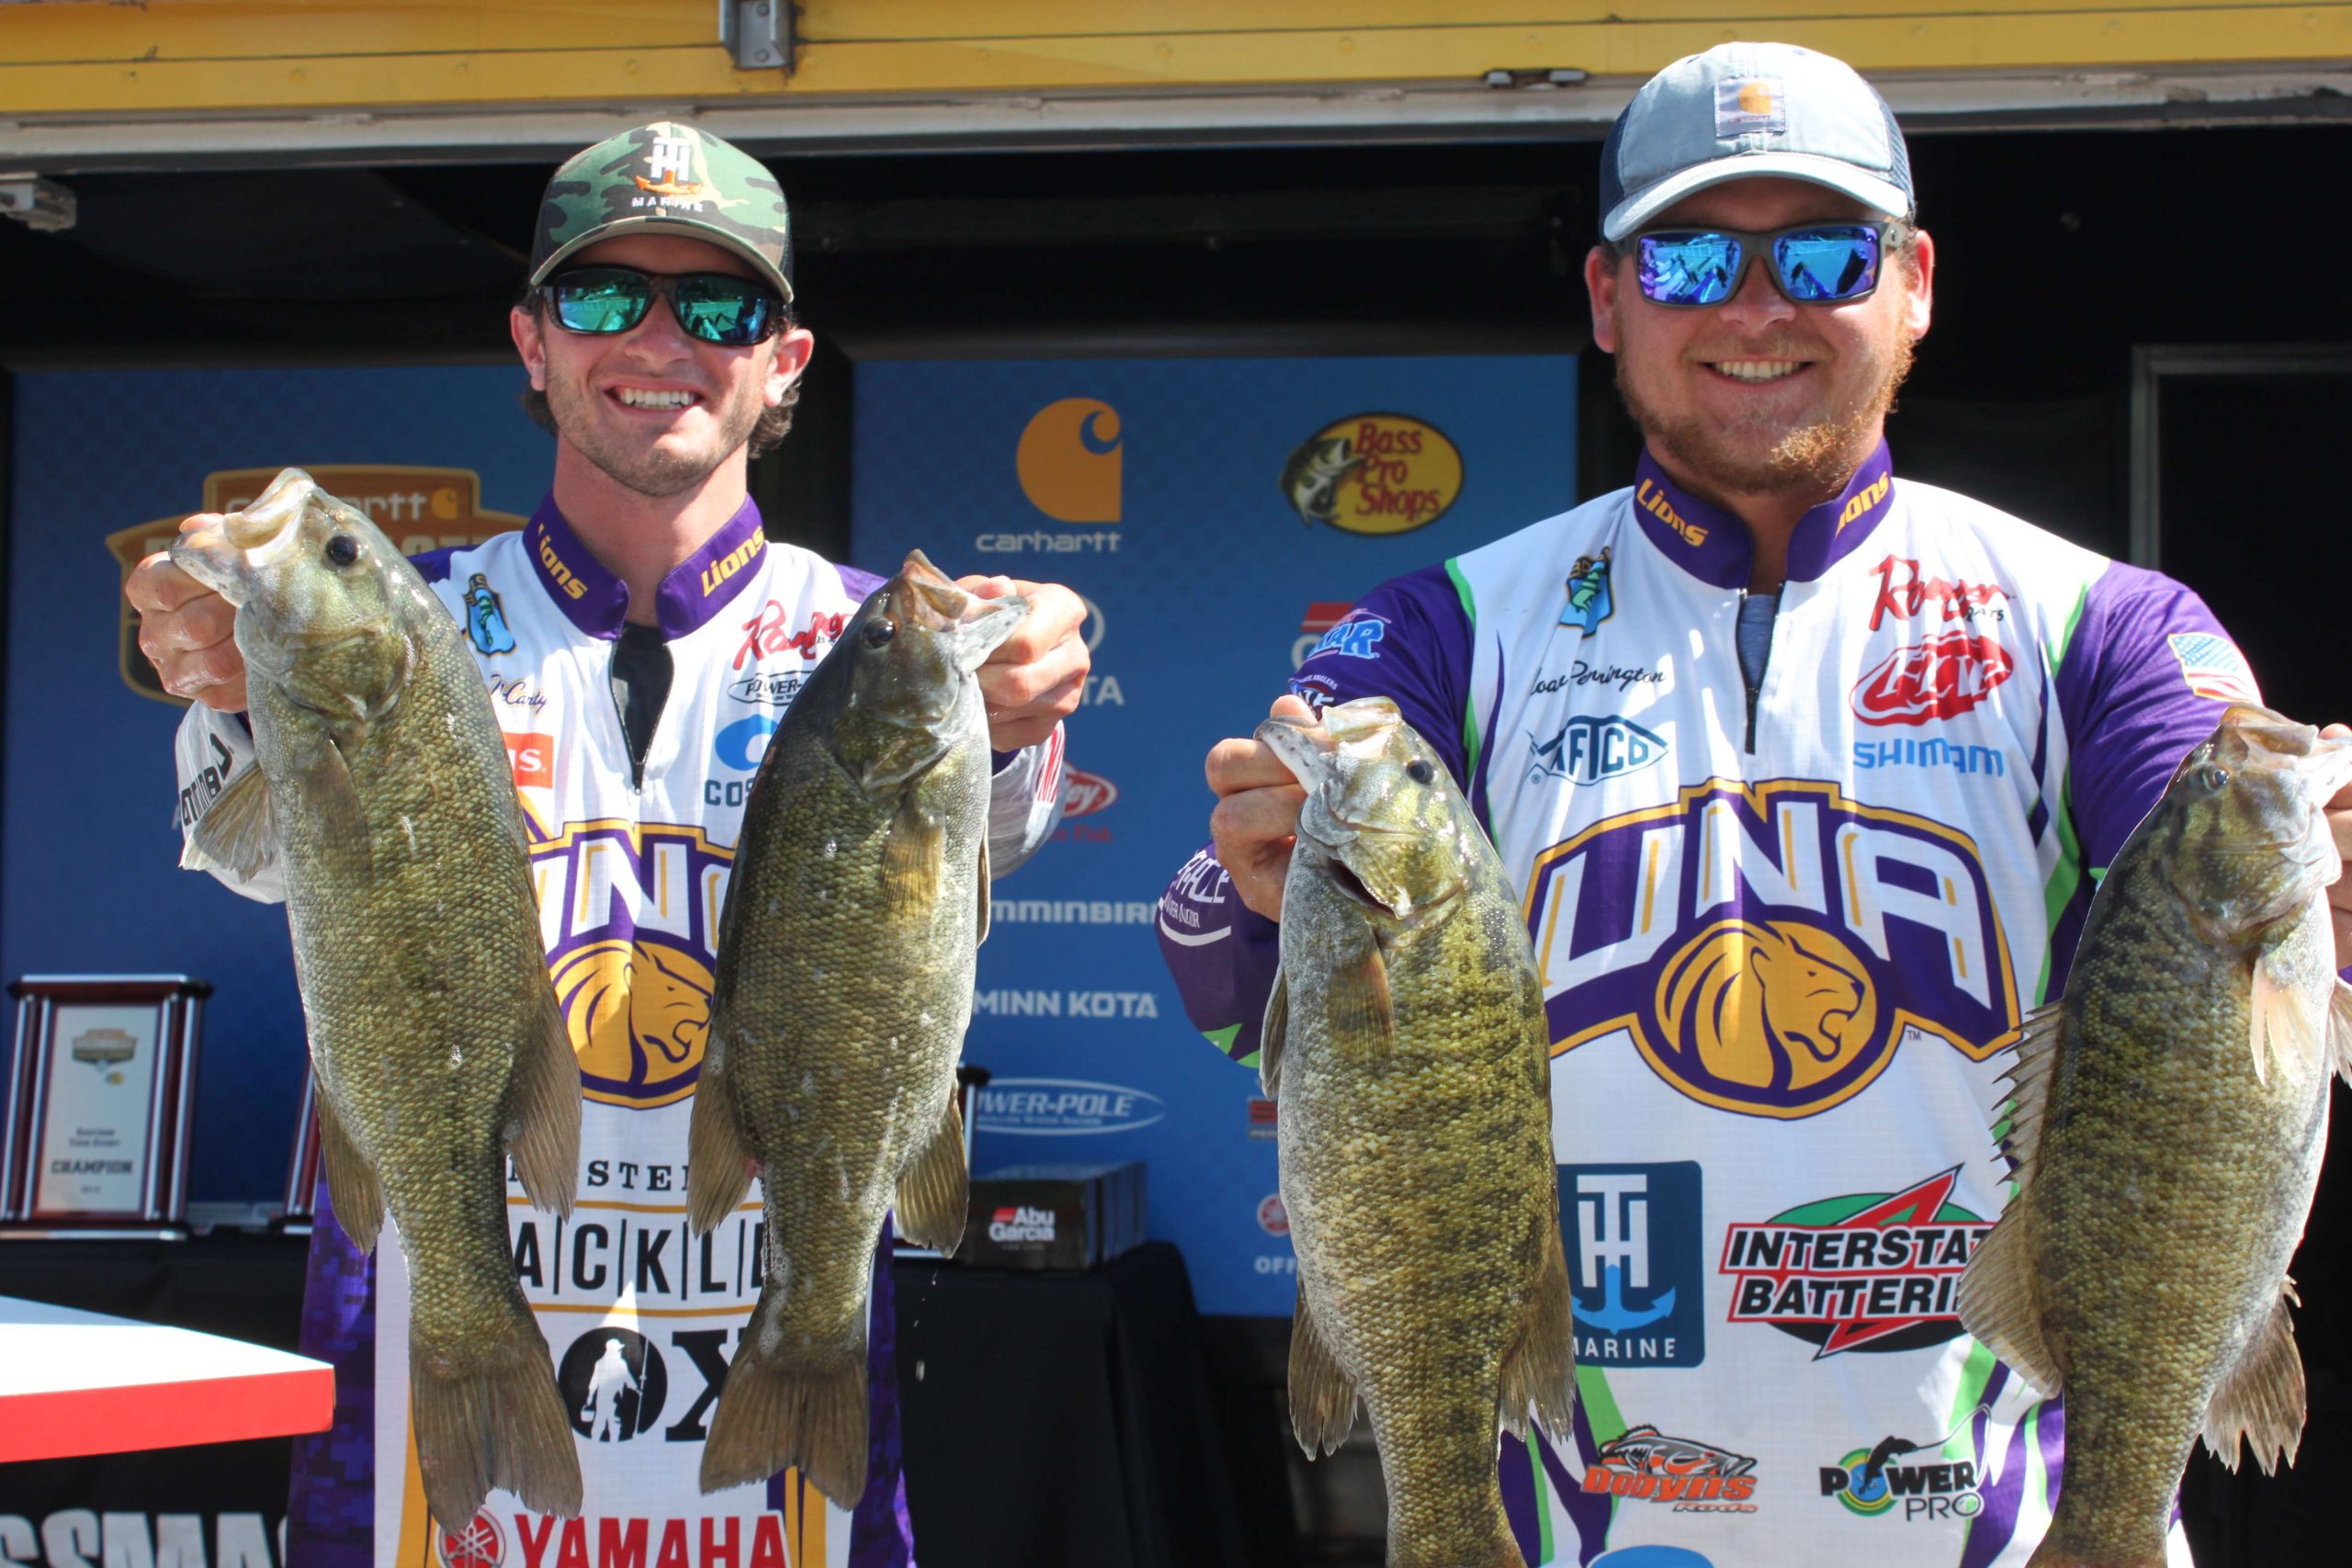 Sloan Pennington and Hunter McCarty of the University of North Alabama placed 13th with a three-day total of 37-4.